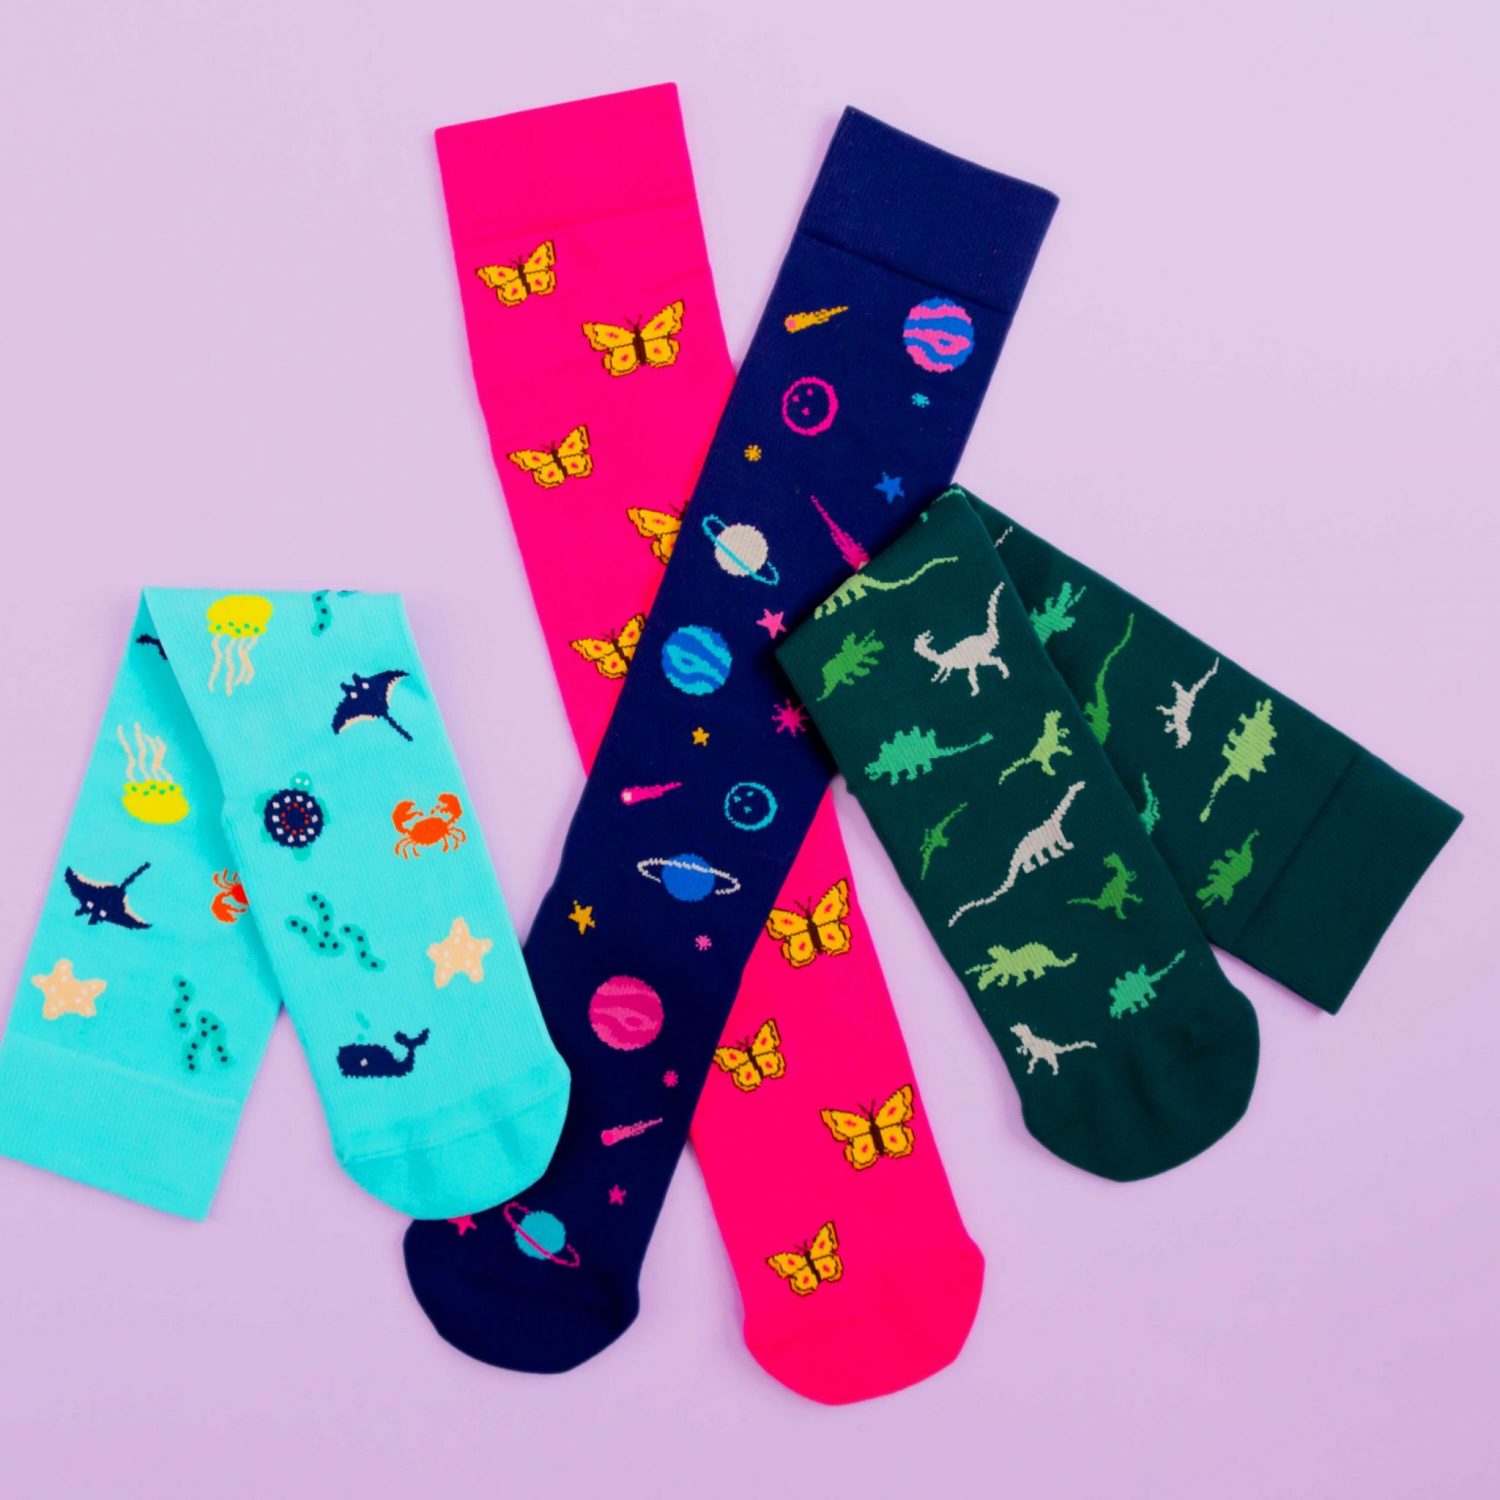 4 colourful (teal, navy, green and pink) compression socks